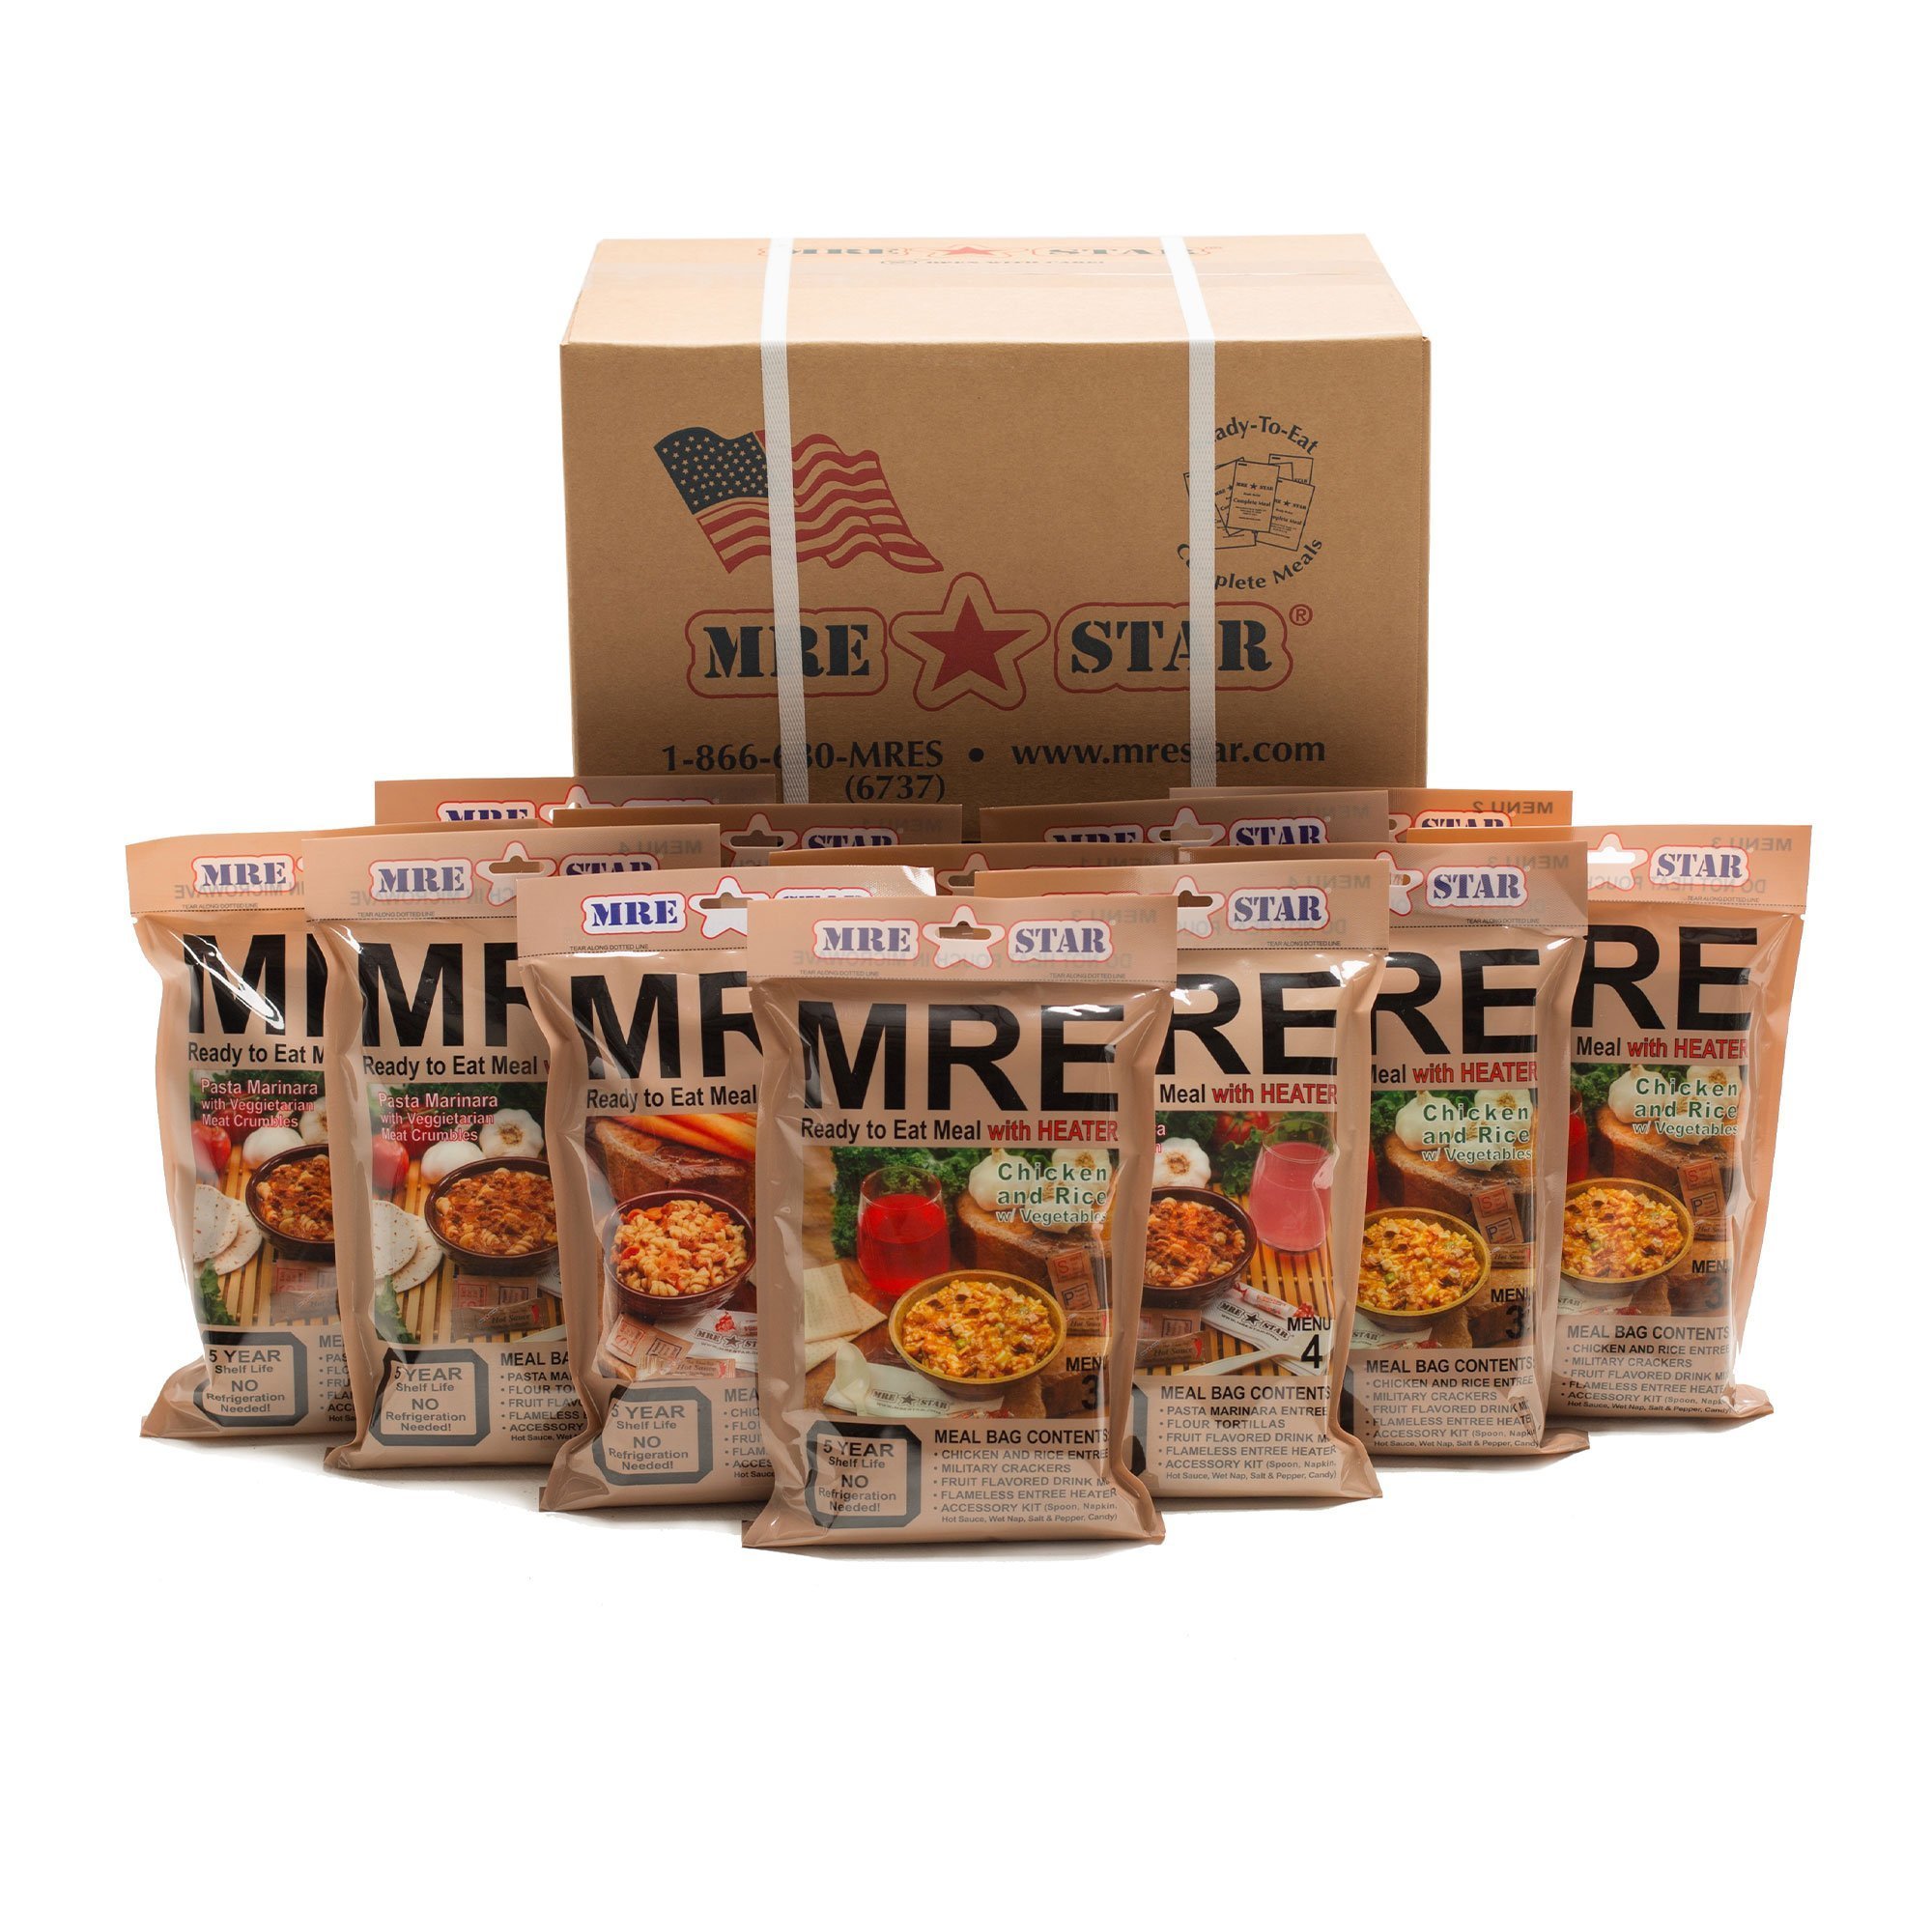 MRE Case Pack with Heaters (12 meals) - $97.95 (Free S/H over $99)